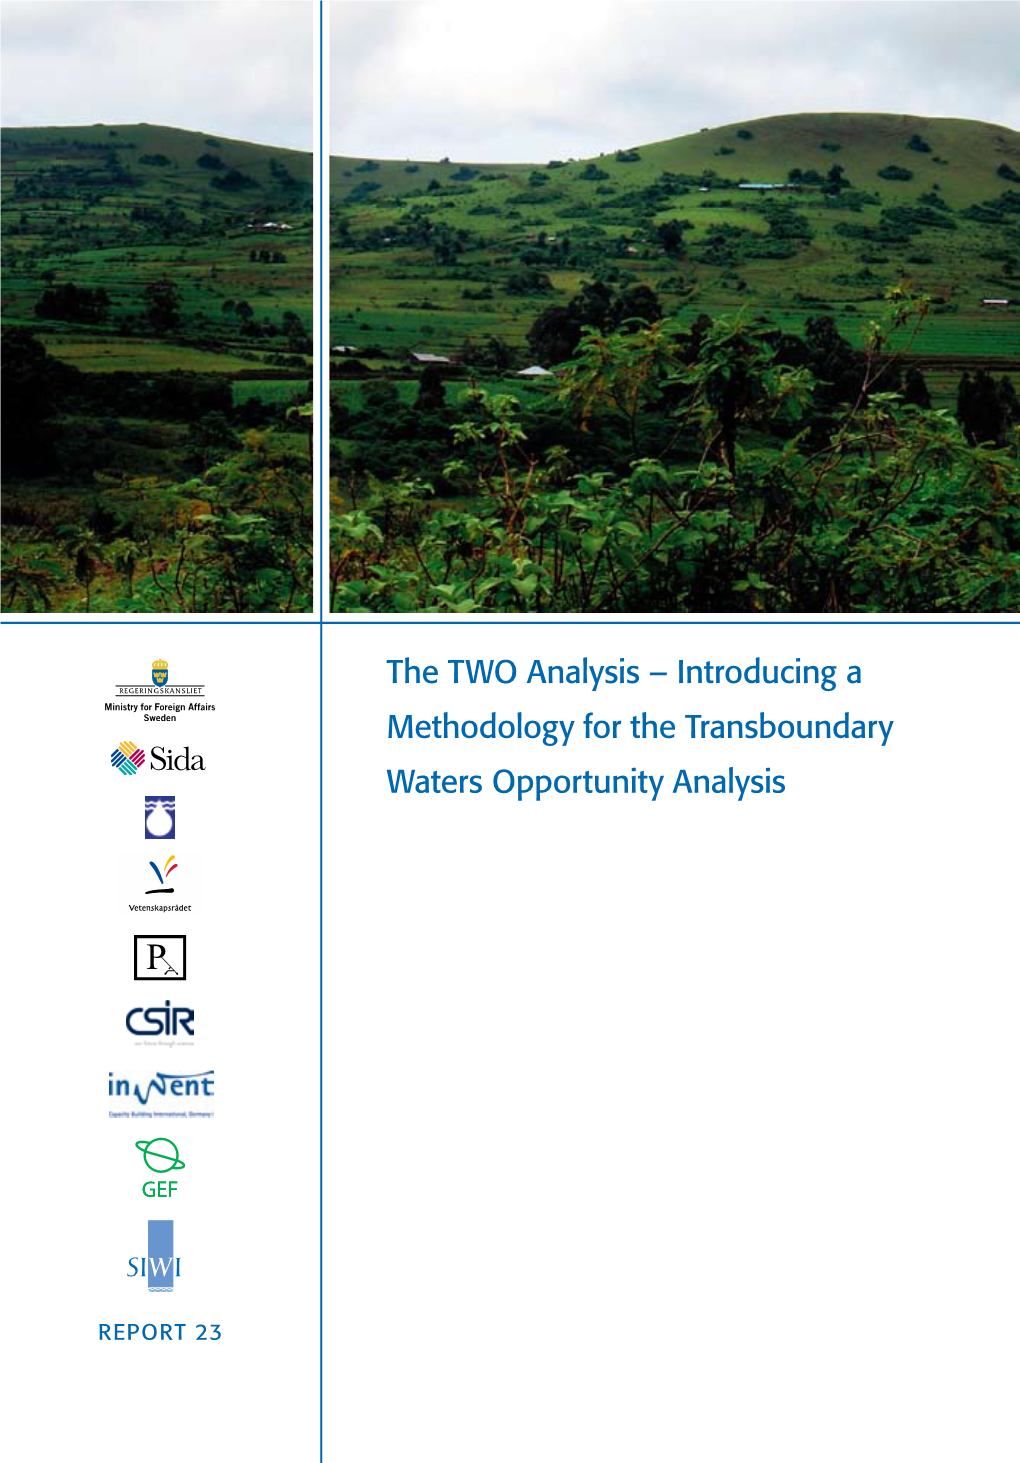 The TWO Analysis – Introducing a Methodology for the Transboundary Waters Opportunity Analysis